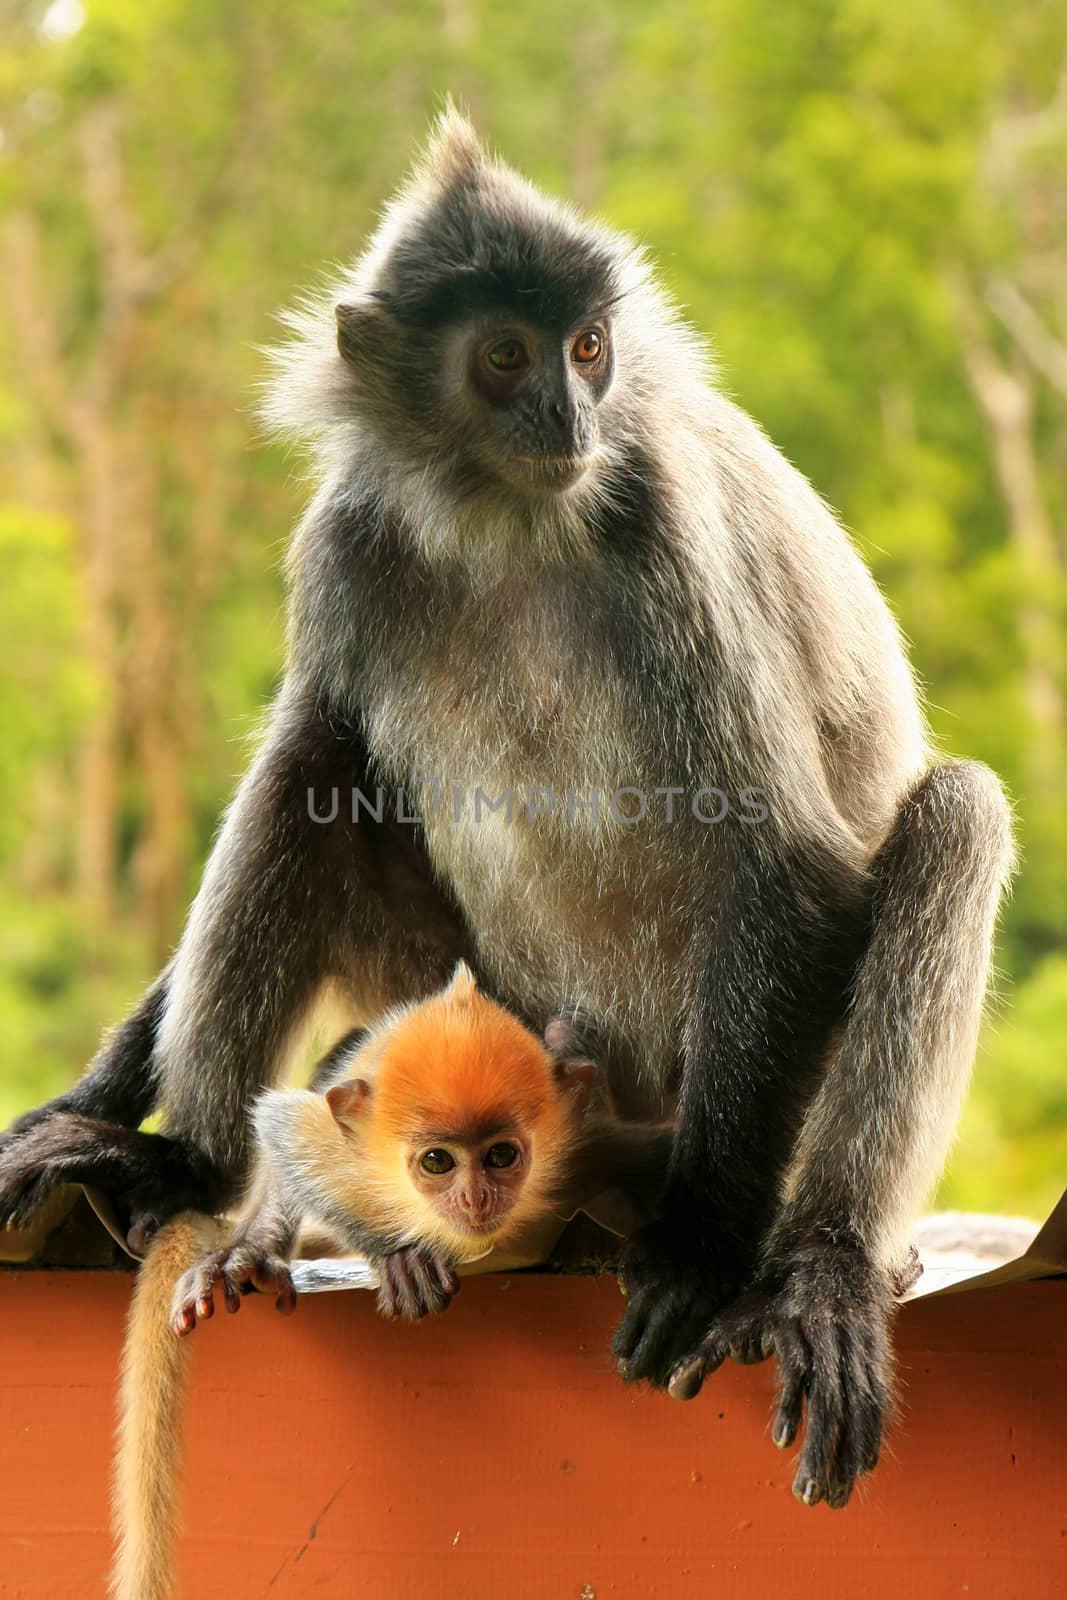 Silvered leaf monkey with a young baby, Borneo, Malaysia by donya_nedomam